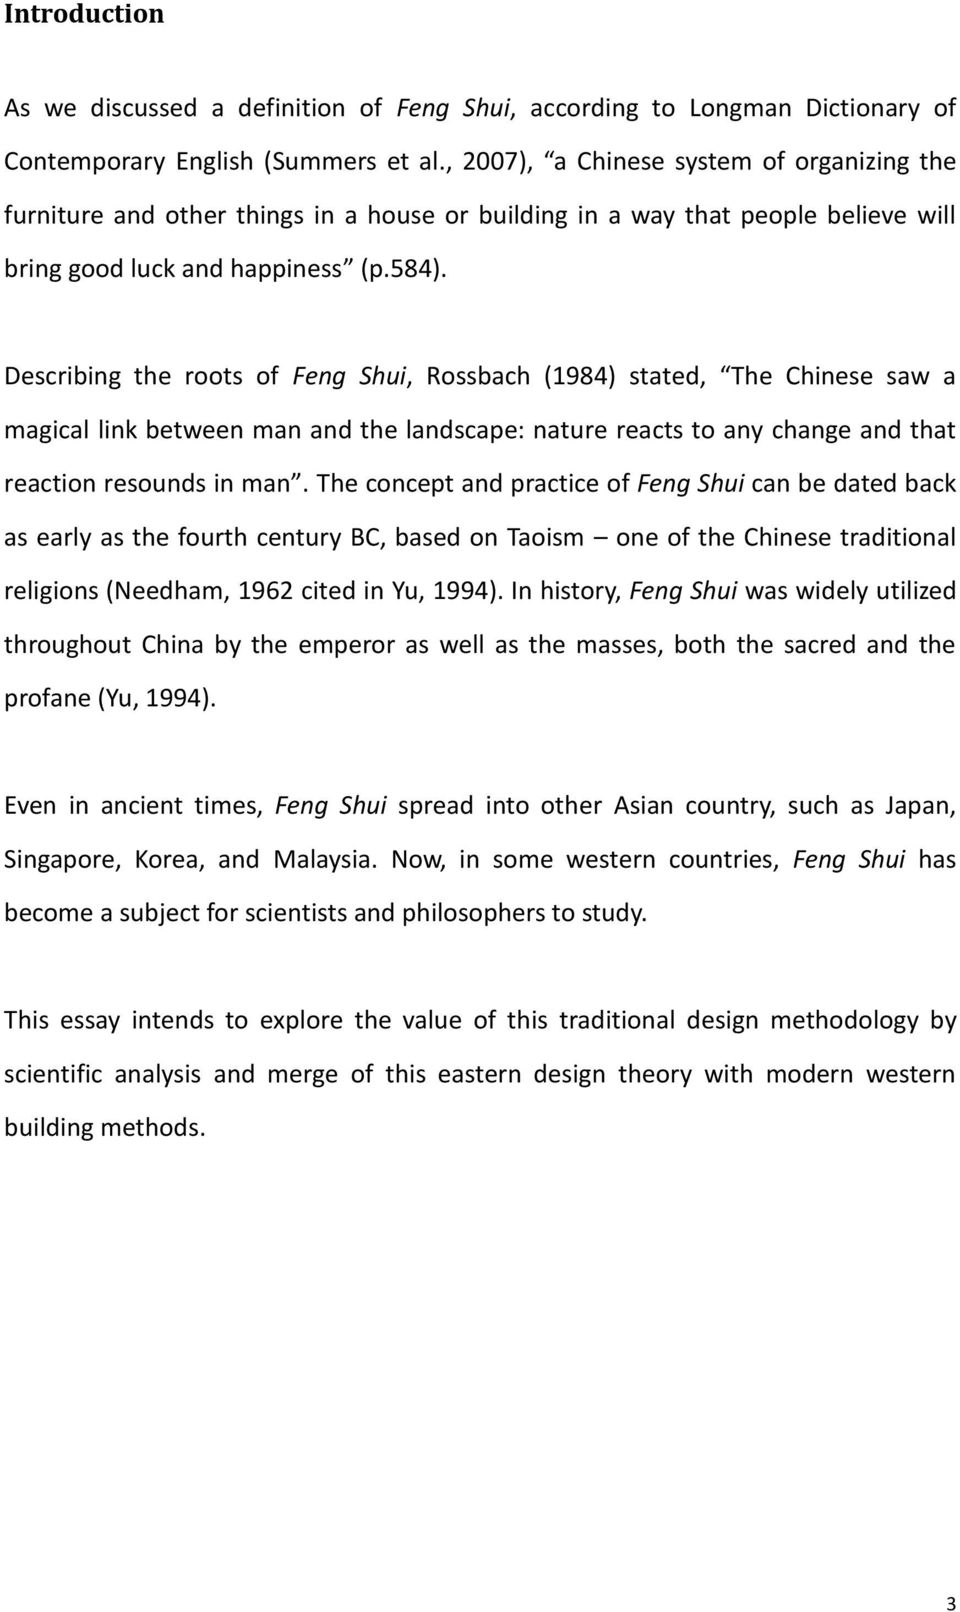 Describing the roots of Feng Shui, Rossbach (1984) stated, The Chinese saw a magical link between man and the landscape: nature reacts to any change and that reaction resounds in man.